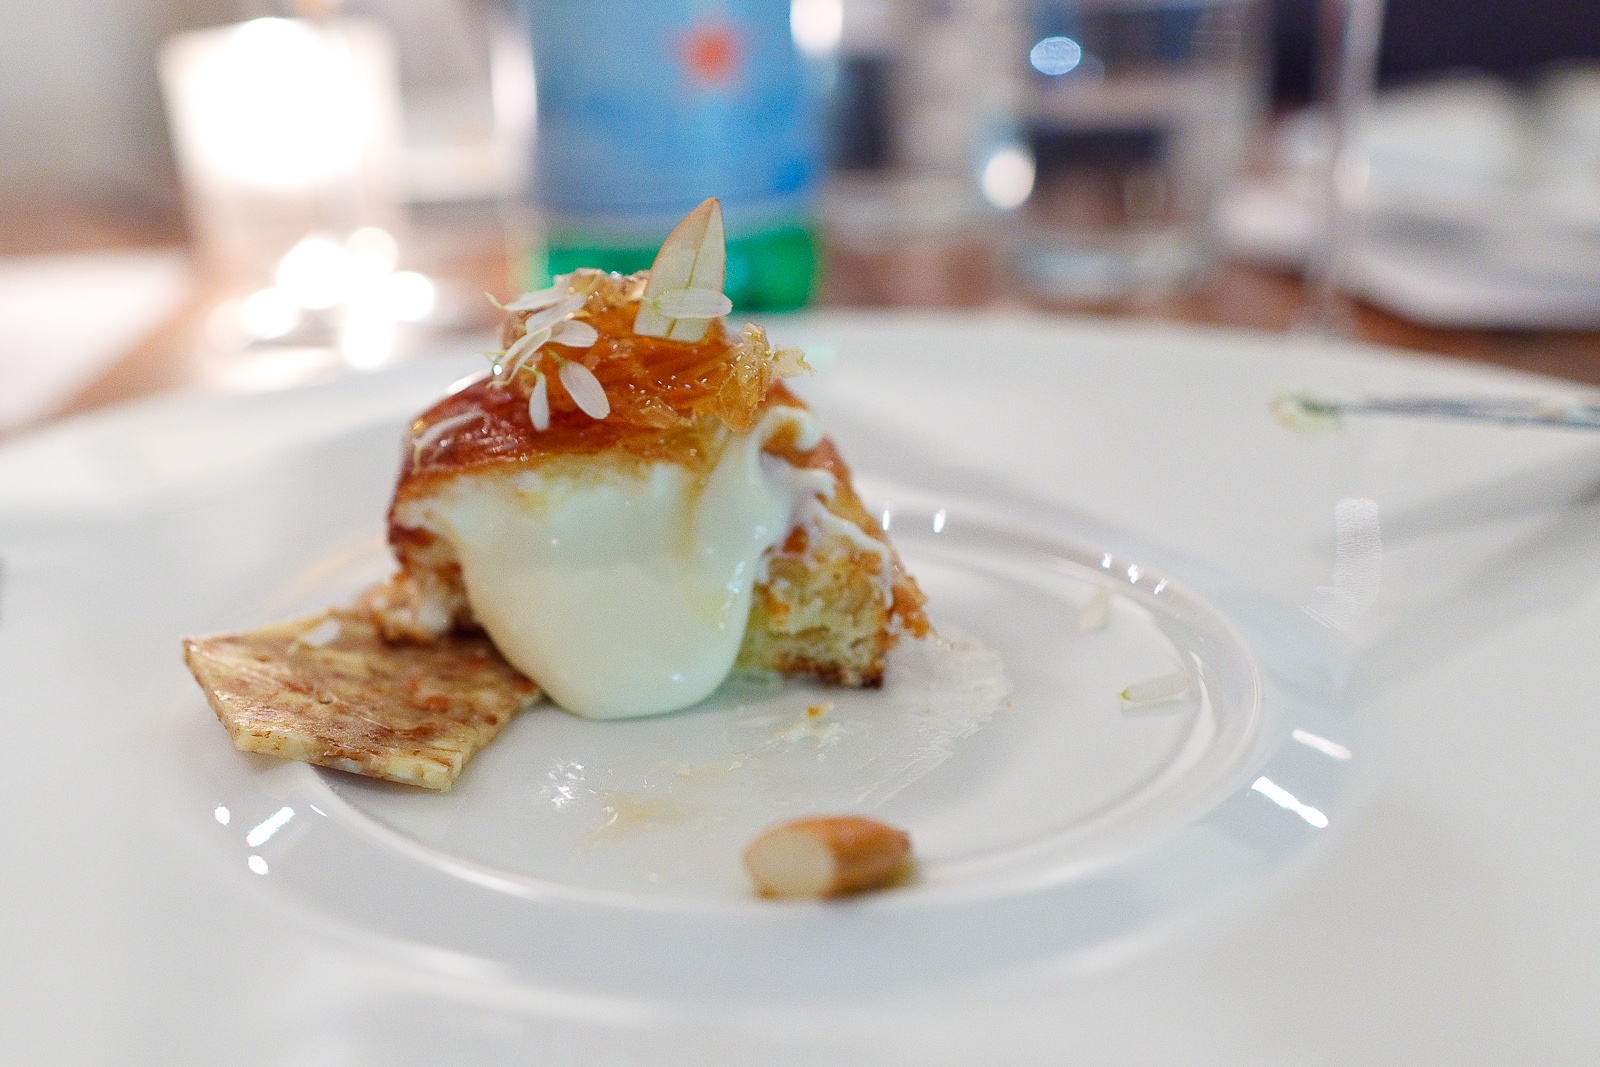 6th Course: Nuvola di percora - Warm nuvola di pecora piped into a freshly baked brioche with honeycomb